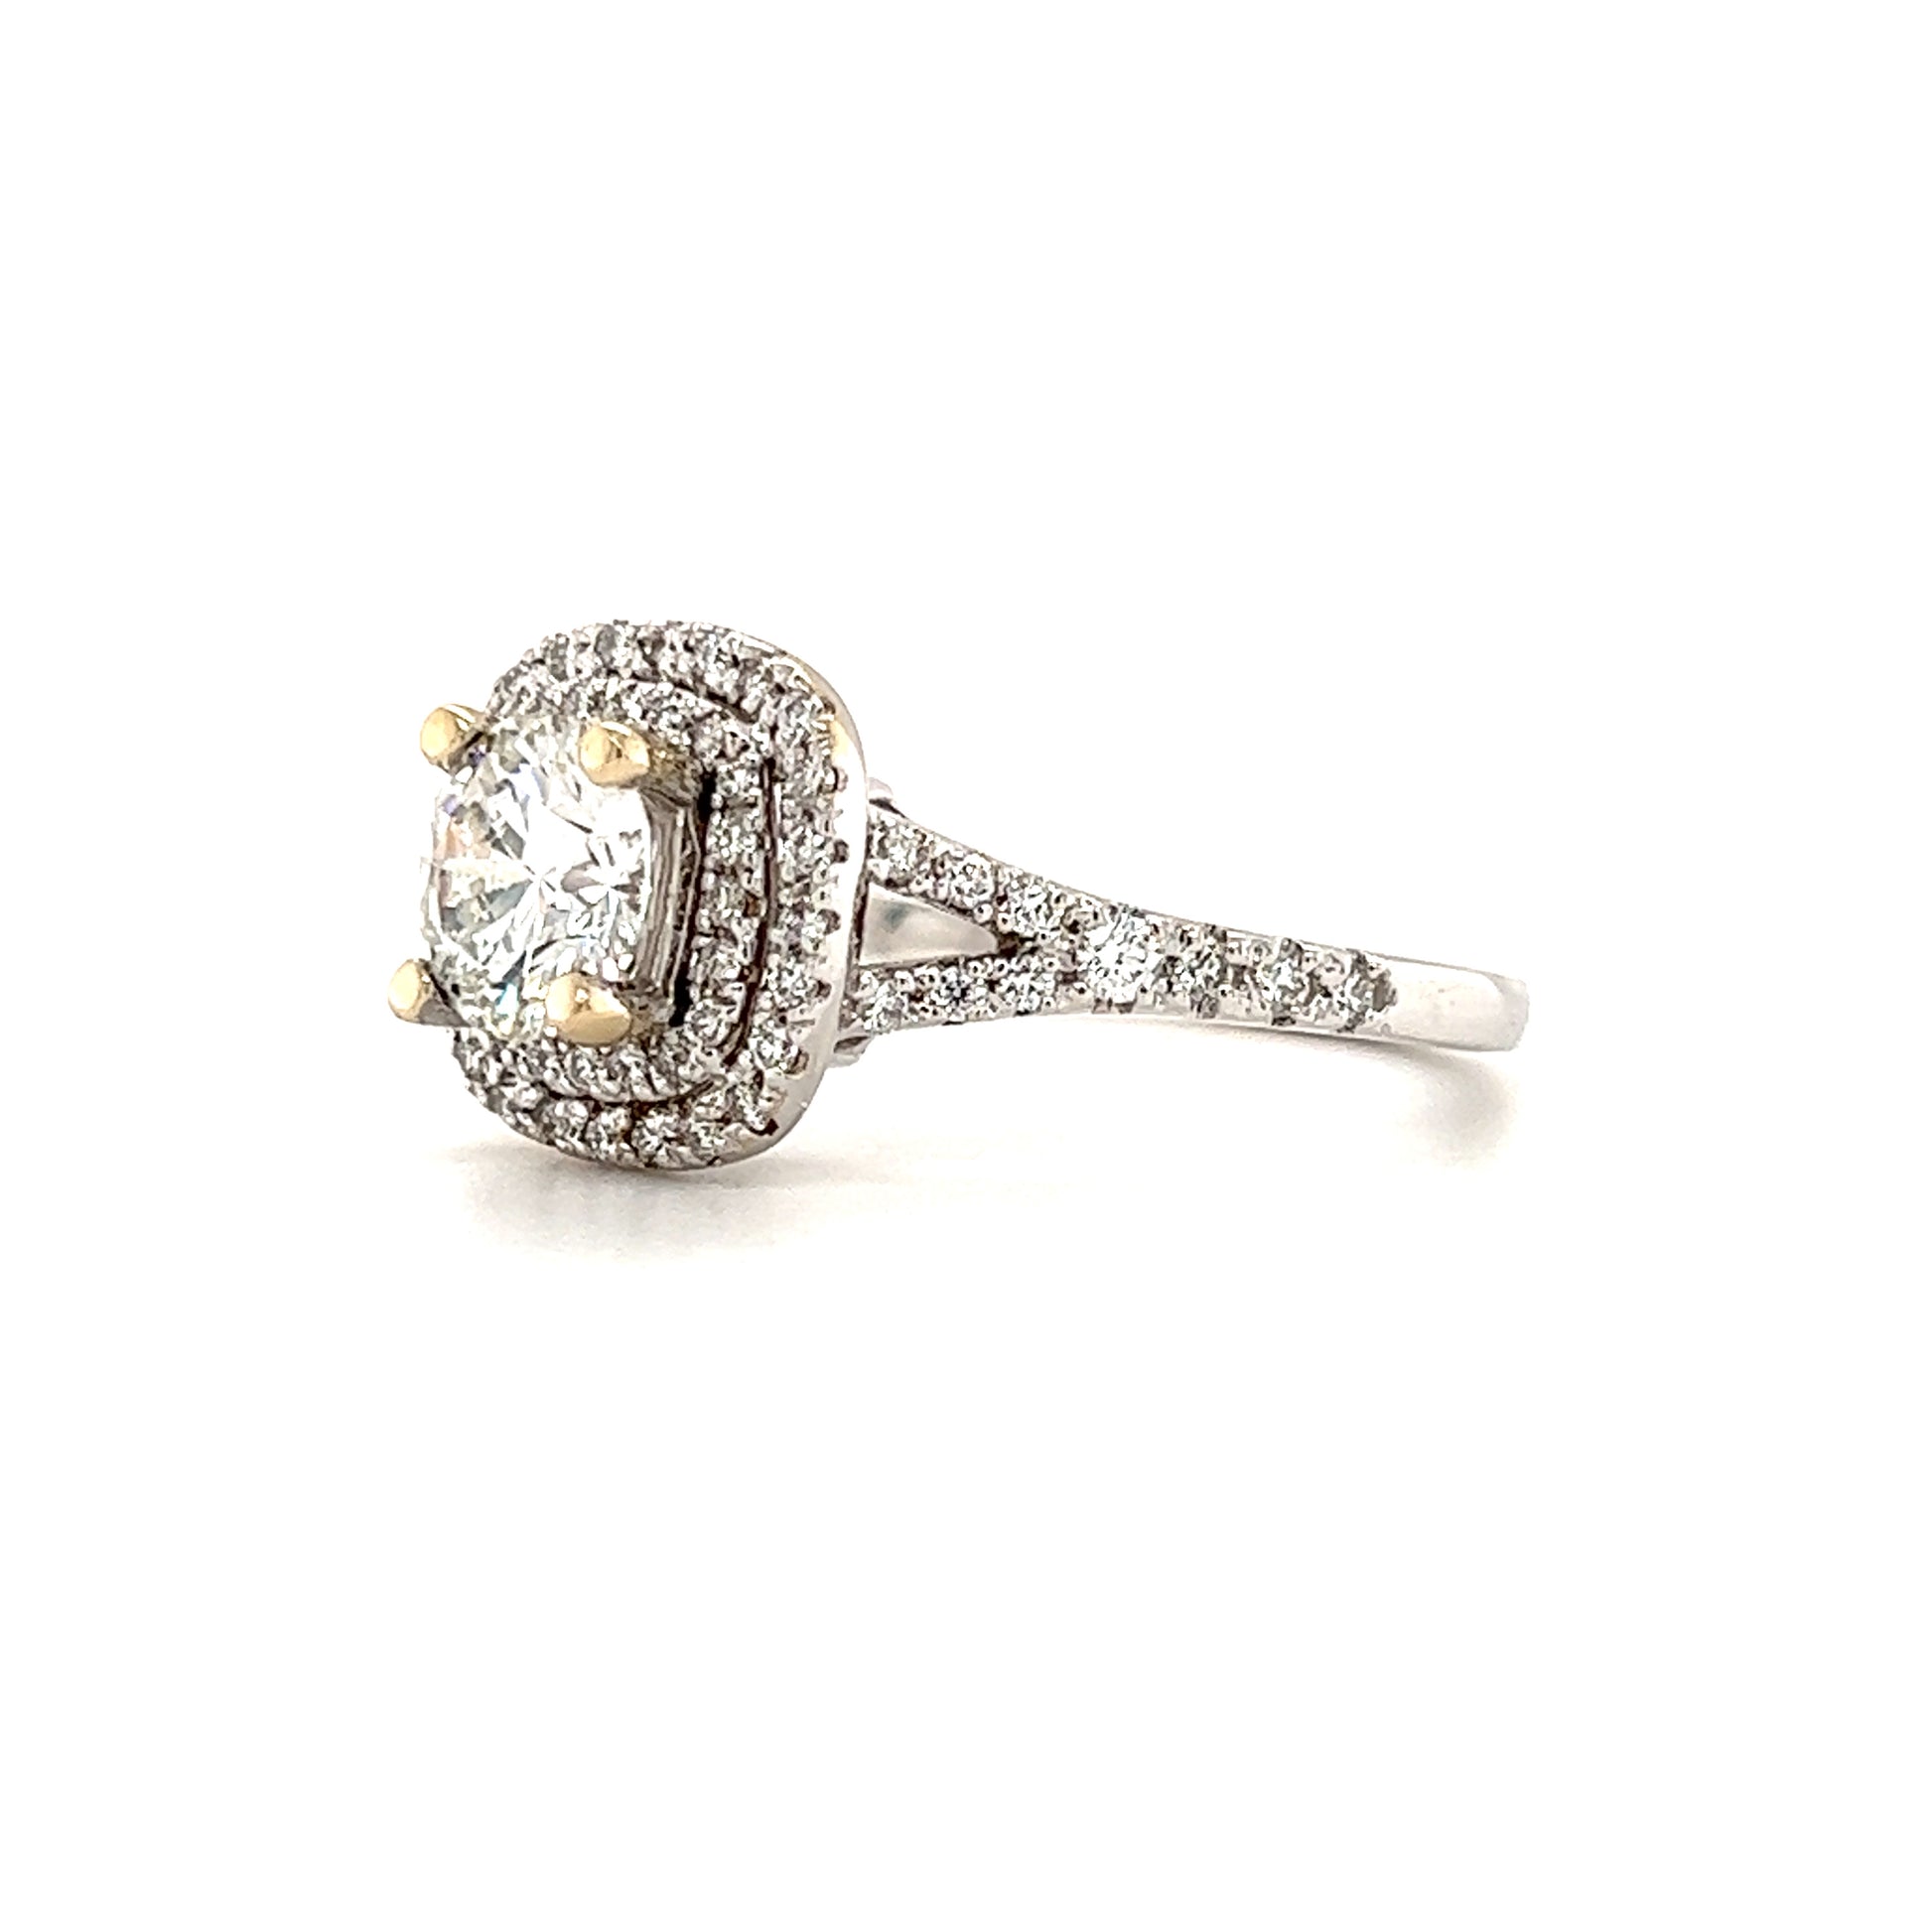 Round Diamond Ring with Double Diamond Halo in 18K White Gold Right Side View